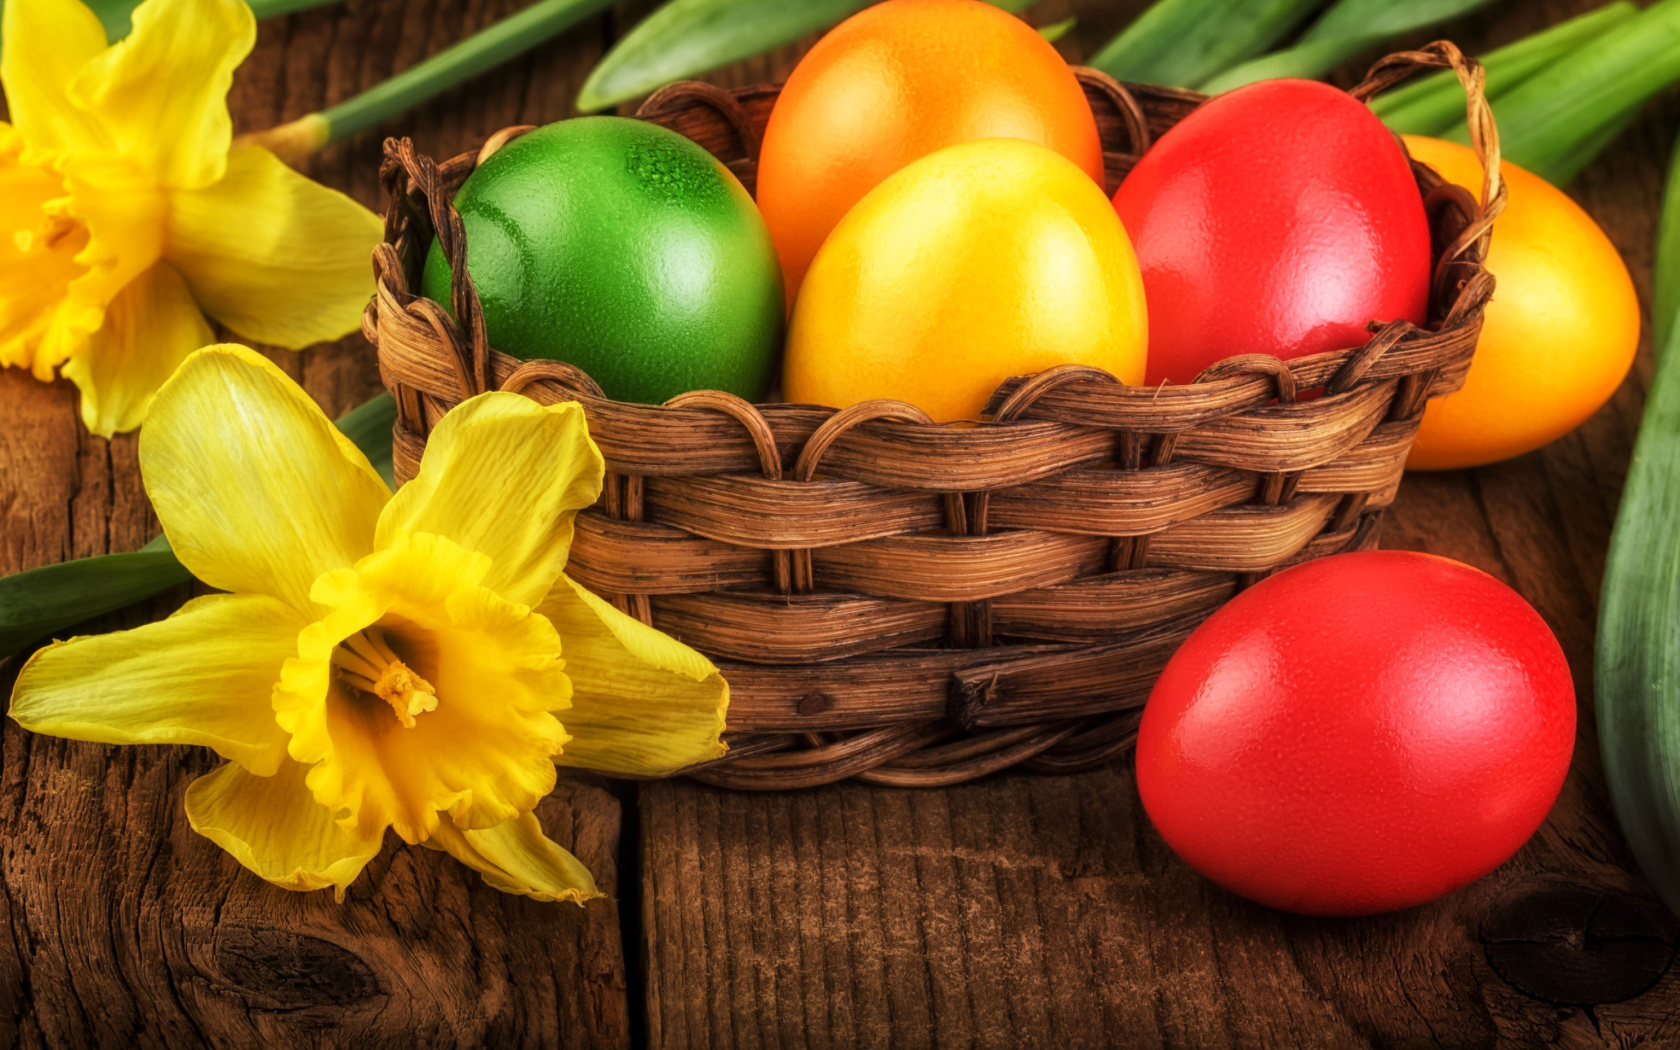 Daffodils and Easter Eggs wallpaper 1680x1050